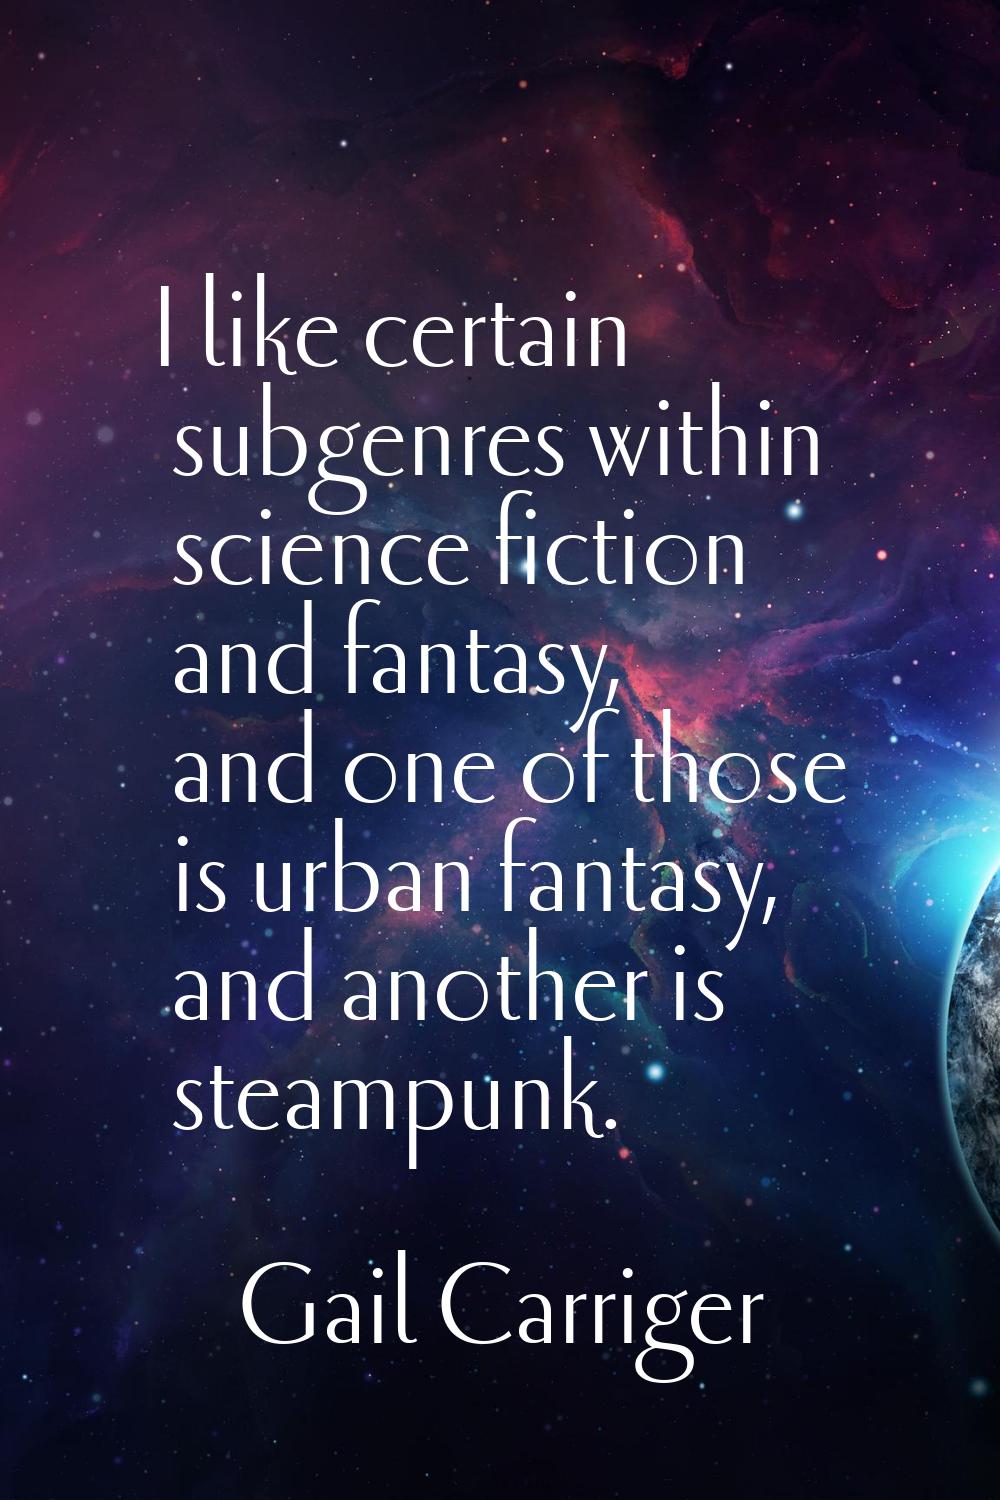 I like certain subgenres within science fiction and fantasy, and one of those is urban fantasy, and